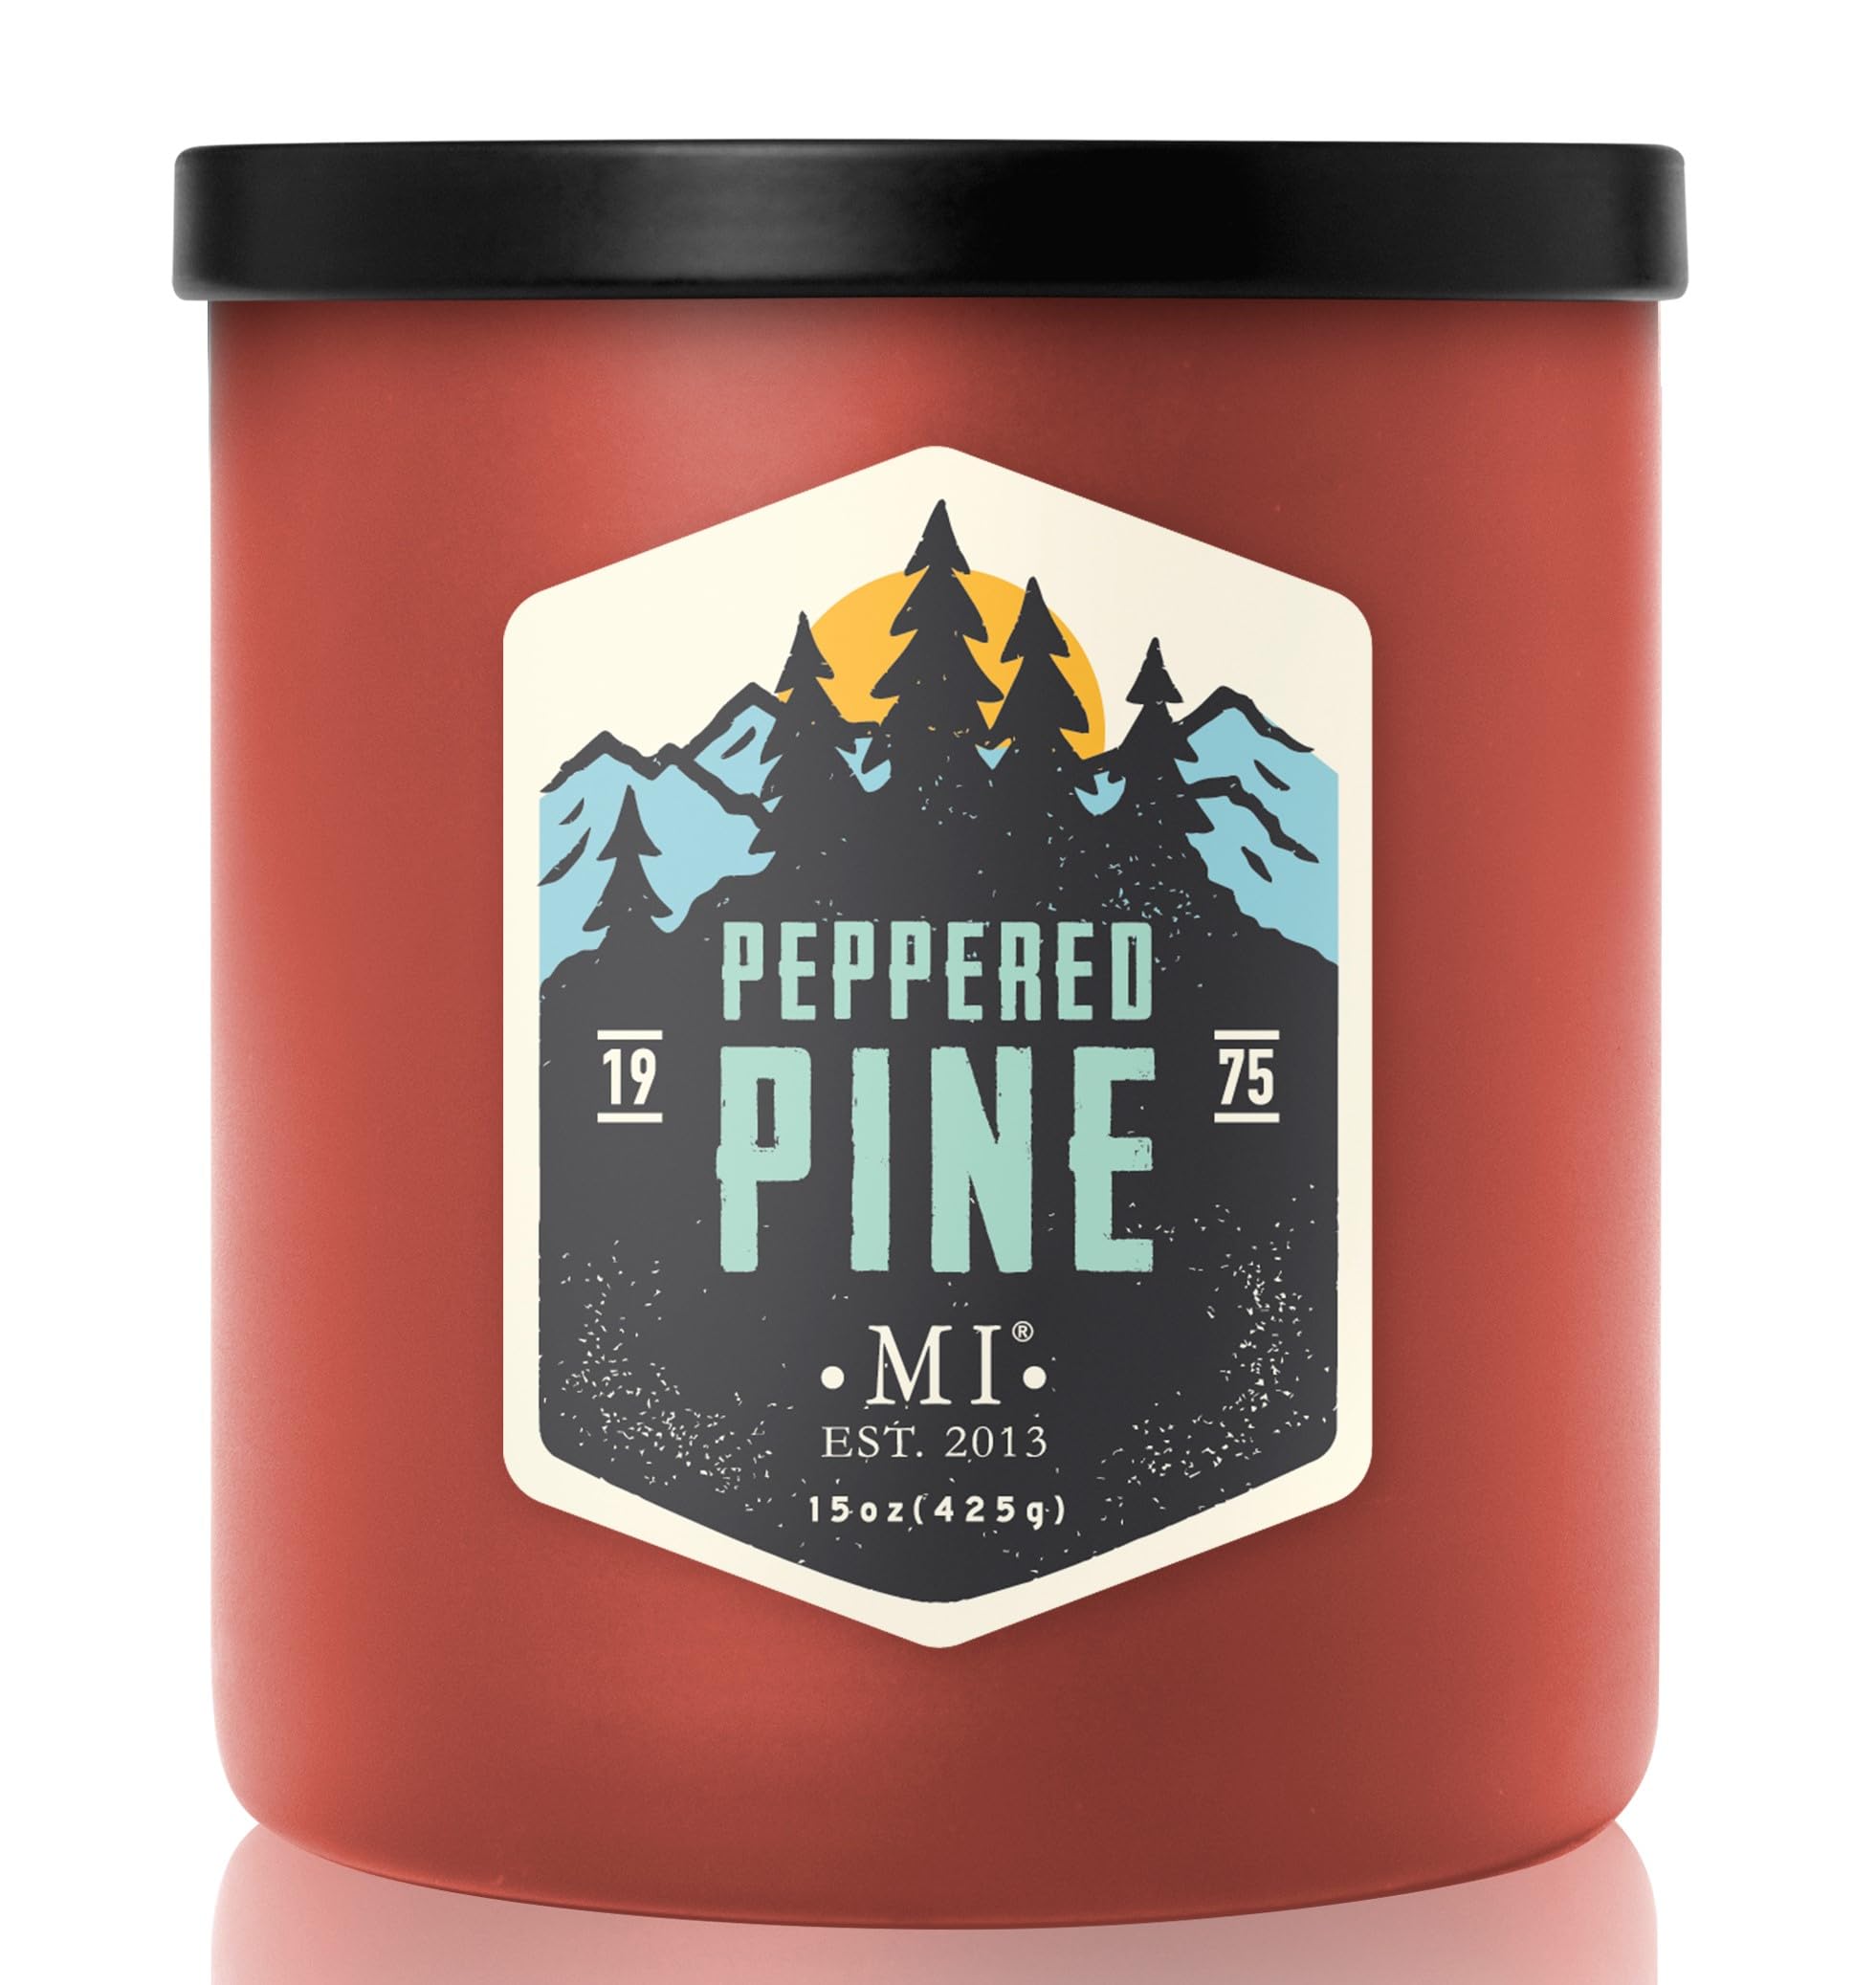 15-Oz Manly Indulgence Scented Jar Candle (Peppered Pine or Hemp & Earl Grey) $8.88 + Free Shipping w/ Prime or on $35+